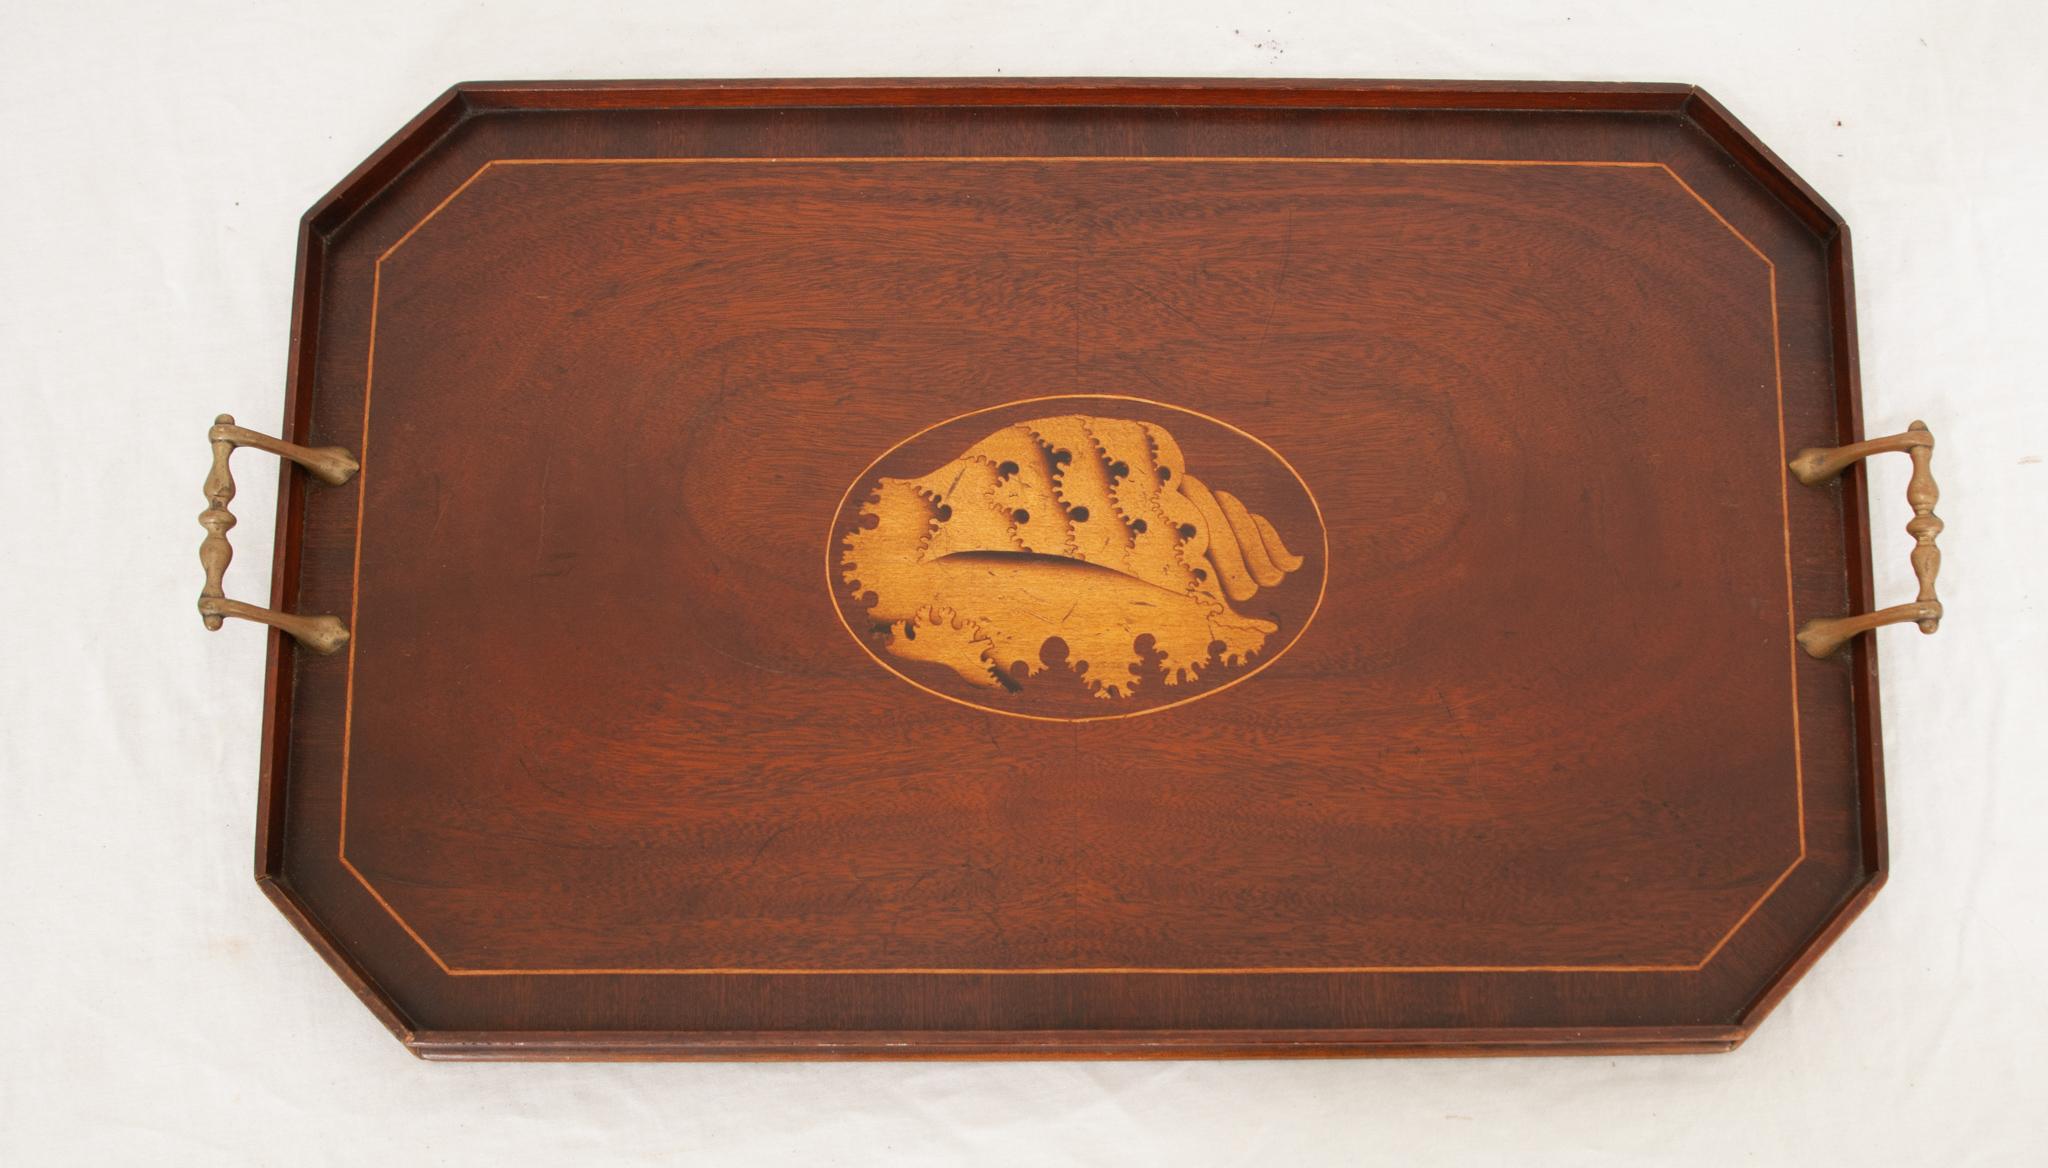 A stunning English Sheraton Revival mahogany tray with an inset raised gallery, canted corners, and green felt backing. It retains its original stoutly mounted brass handles and features a superb inlaid marquetry decorated center of an conch shell.